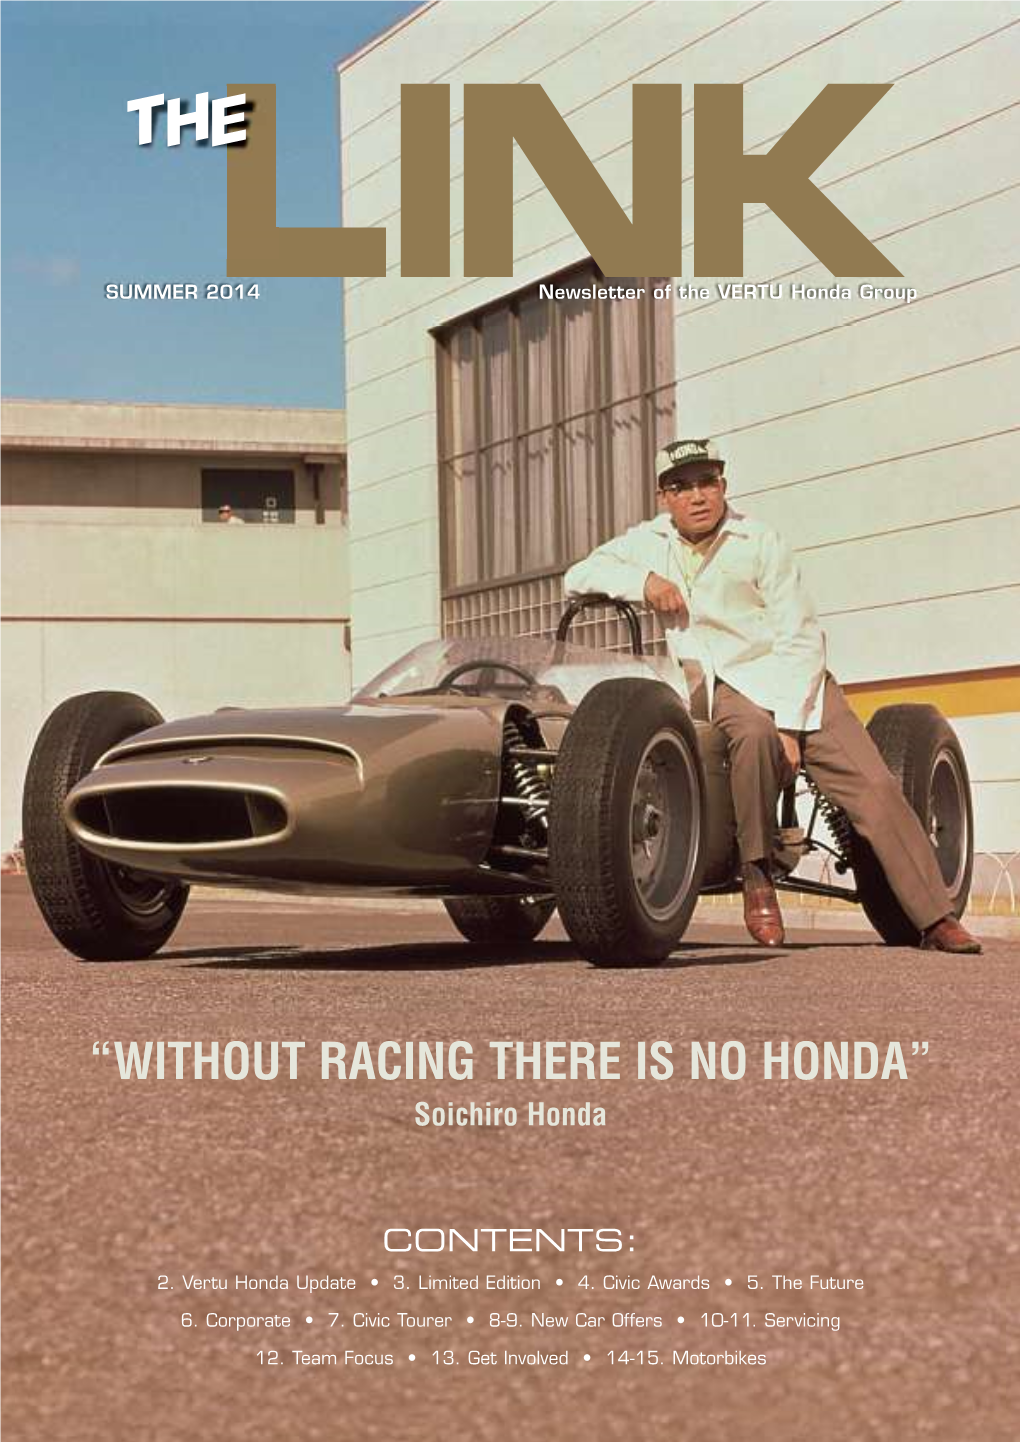 “Without Racing There Is No Honda”